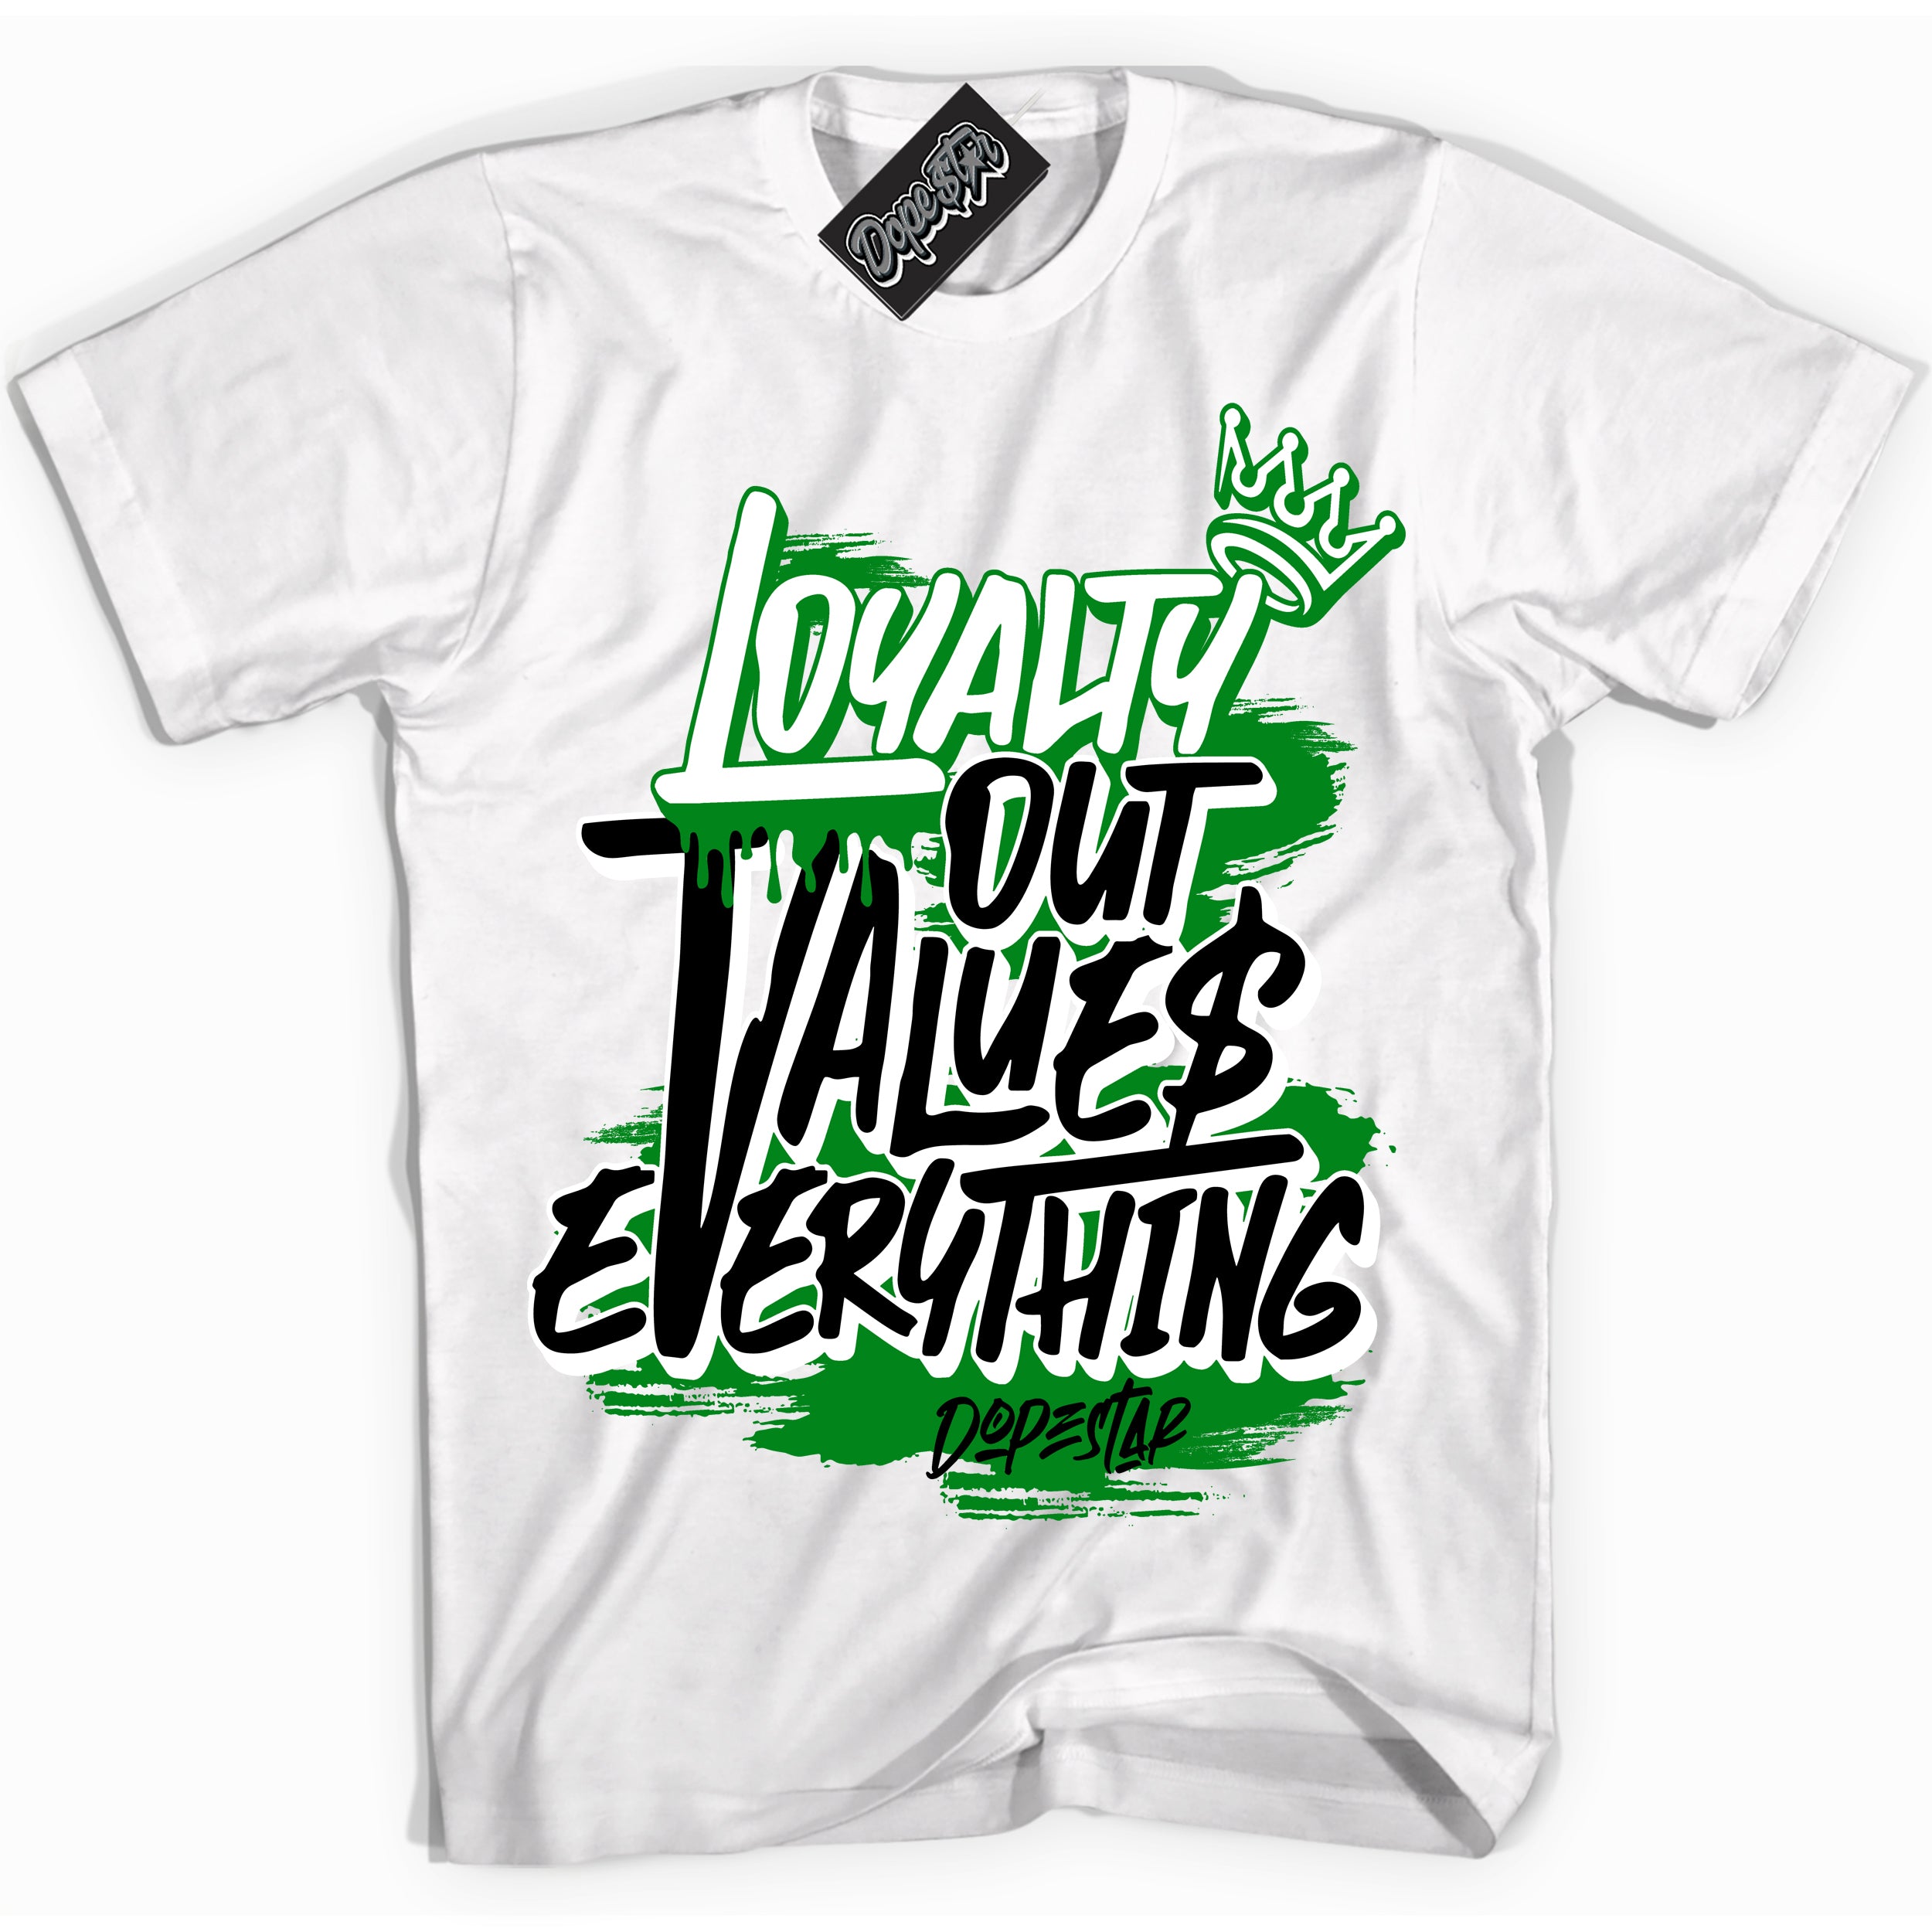 Cool White Shirt with “ Loyalty Out Values Everything” design that perfectly matches OG Lucky Green 1s Sneakers.